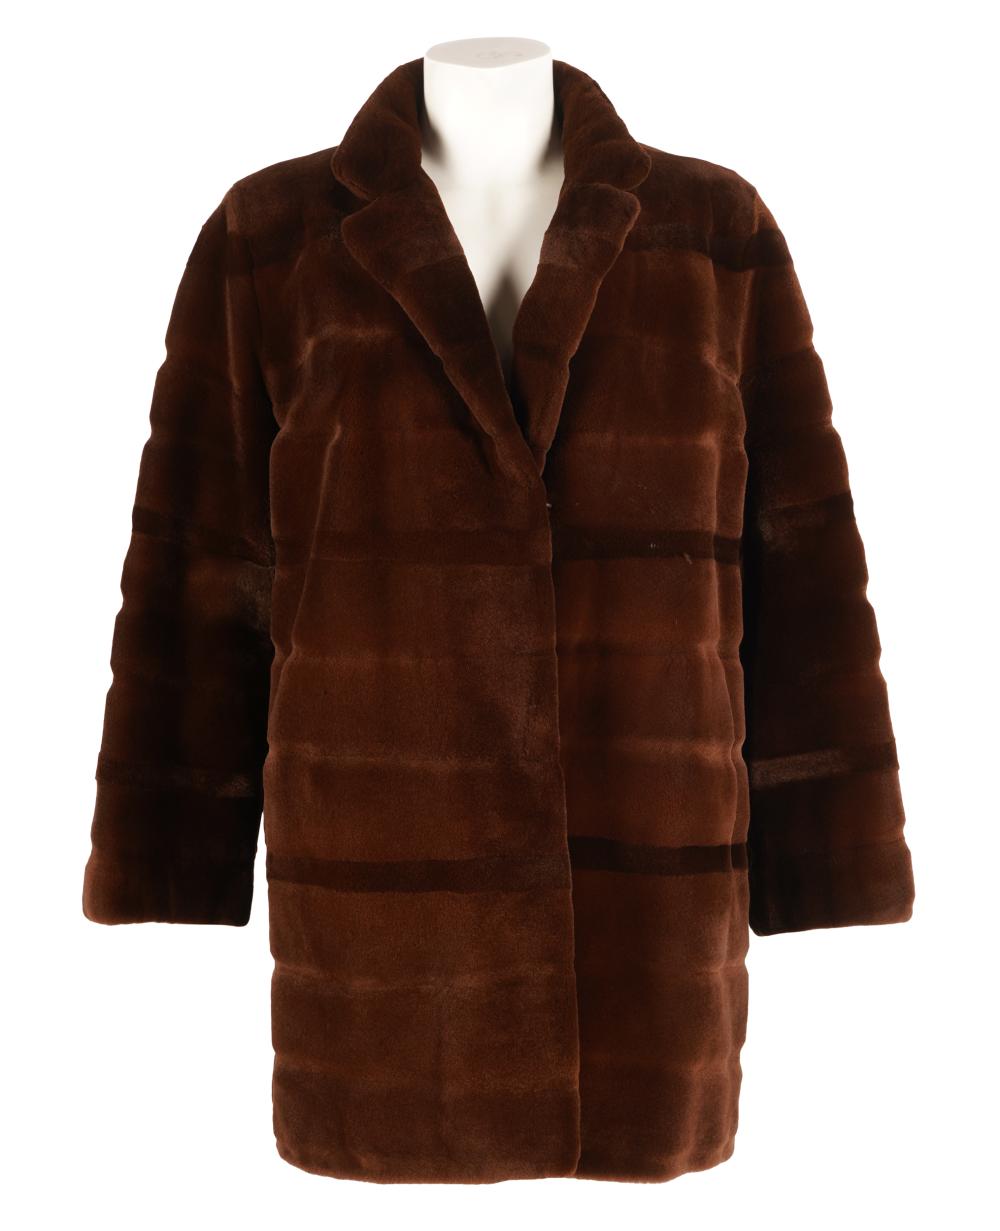 BROWN SHEARED FUR JACKETwith label;